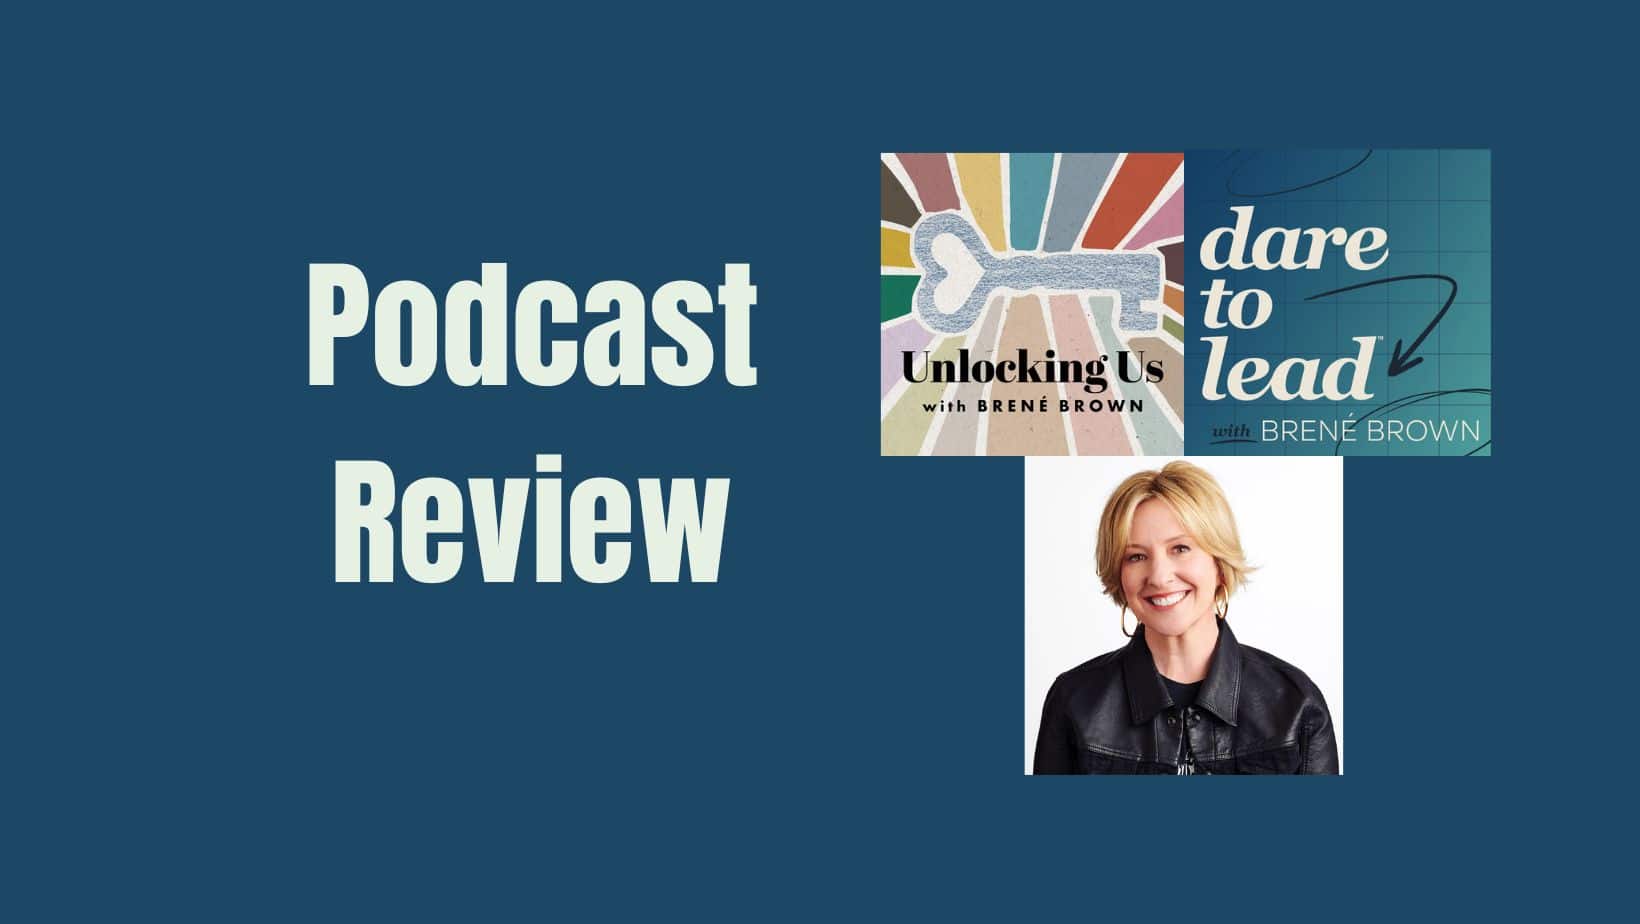 Brene Brown Podcasts Dare to Lead and Unlocking Us